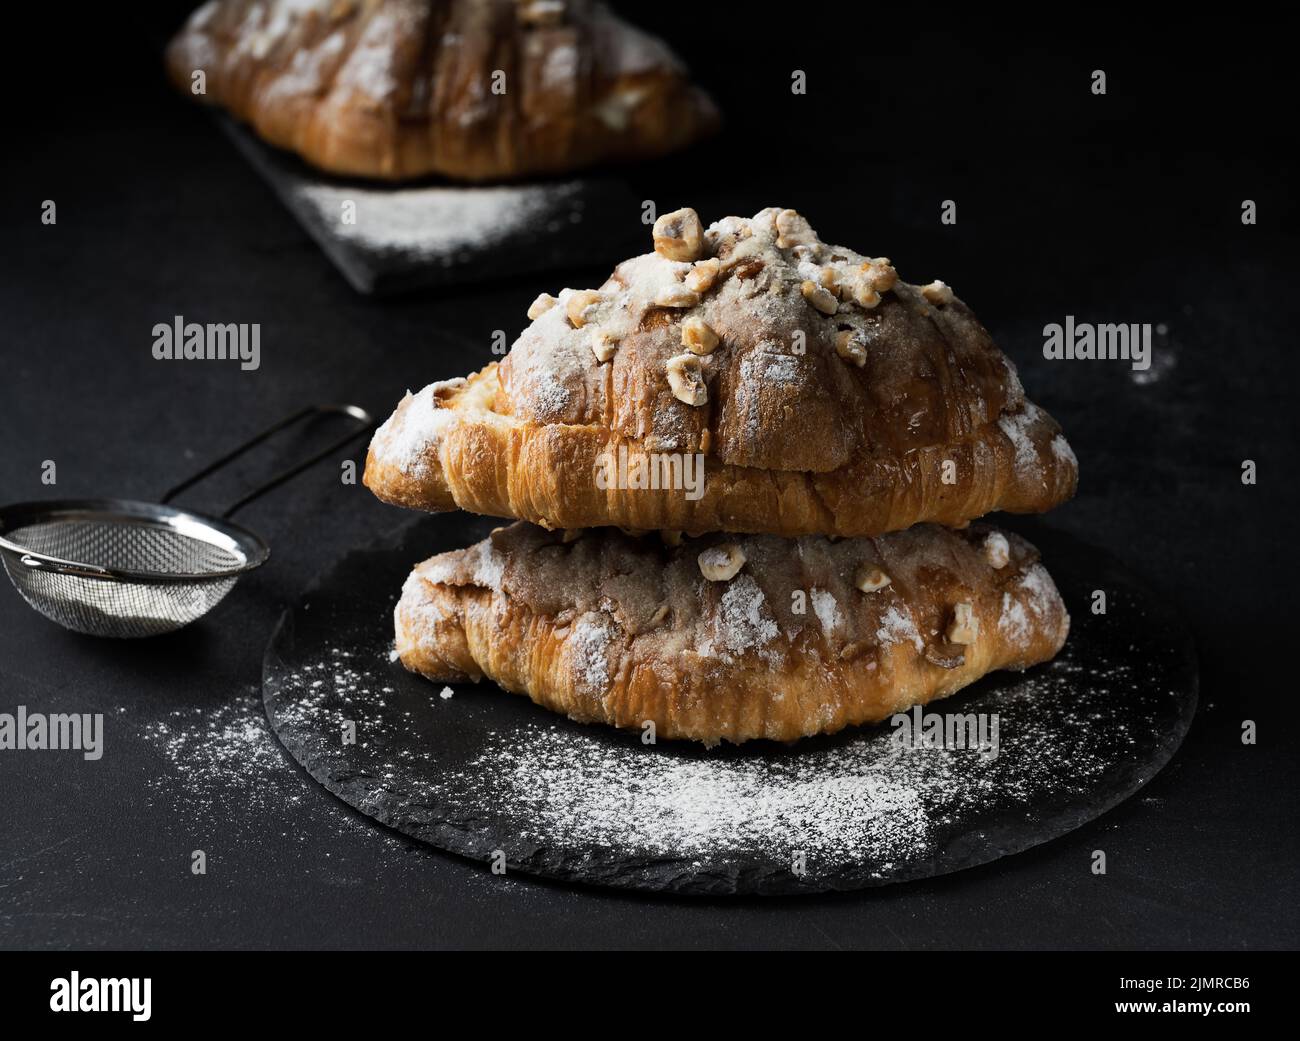 Baked croissant on a wooden board and sprinkled with powdered sugar, black table. Appetizing pastries for breakfast Stock Photo